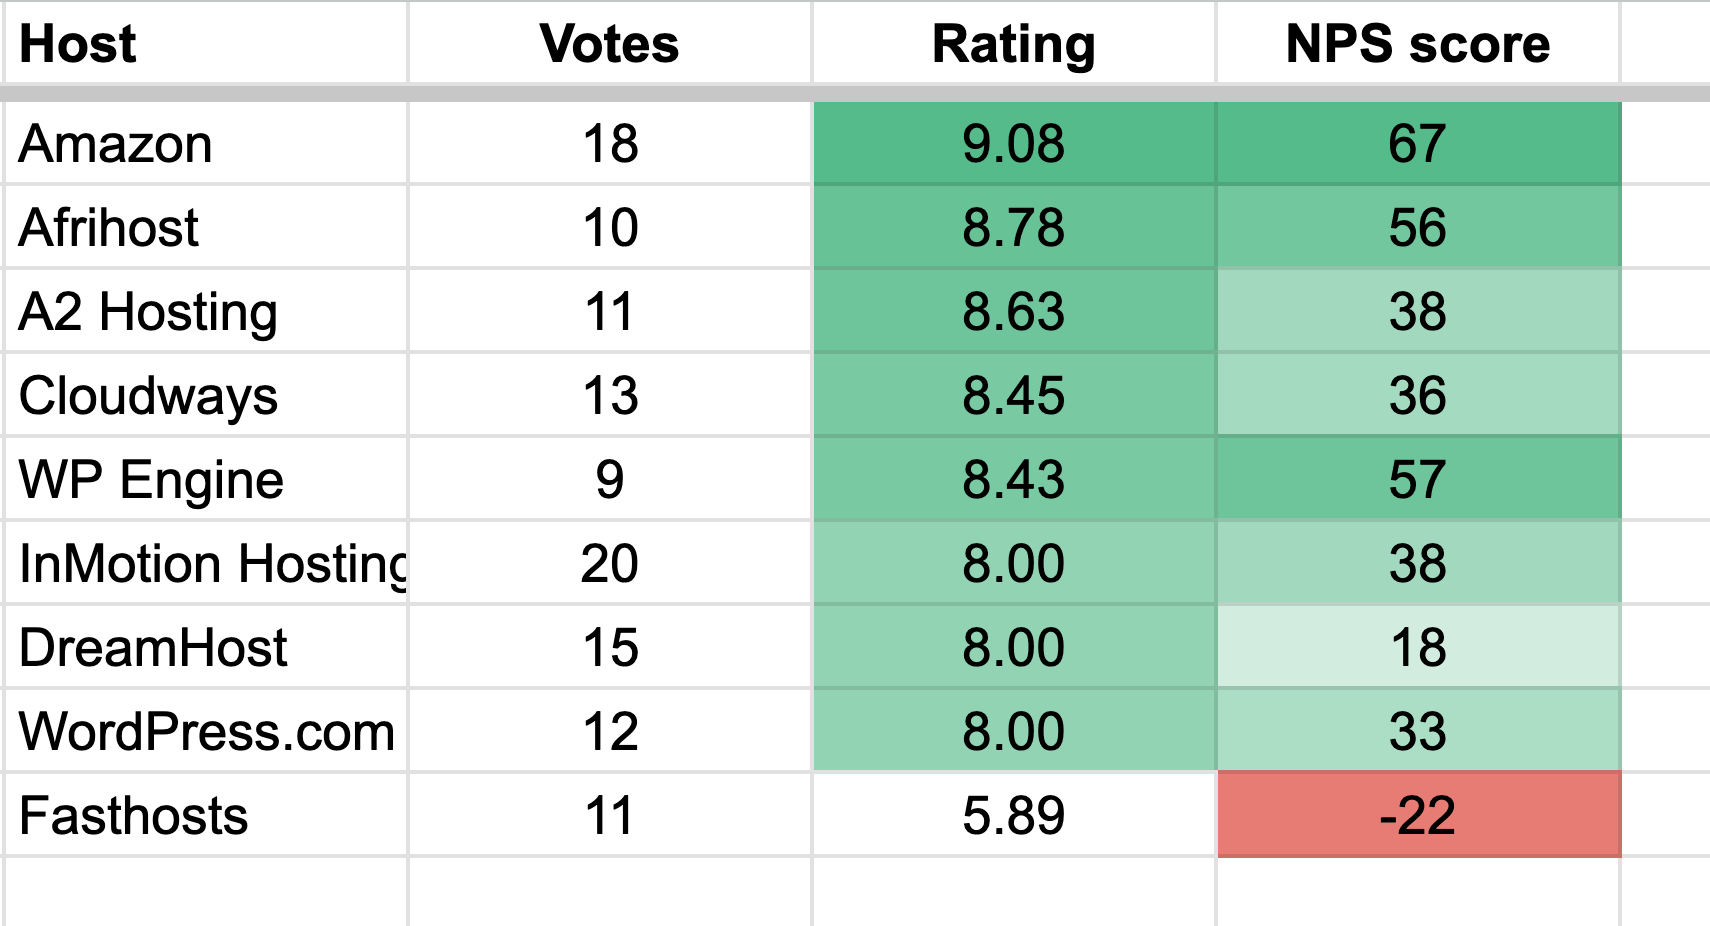 Top rated hosts that got 35 votes or less